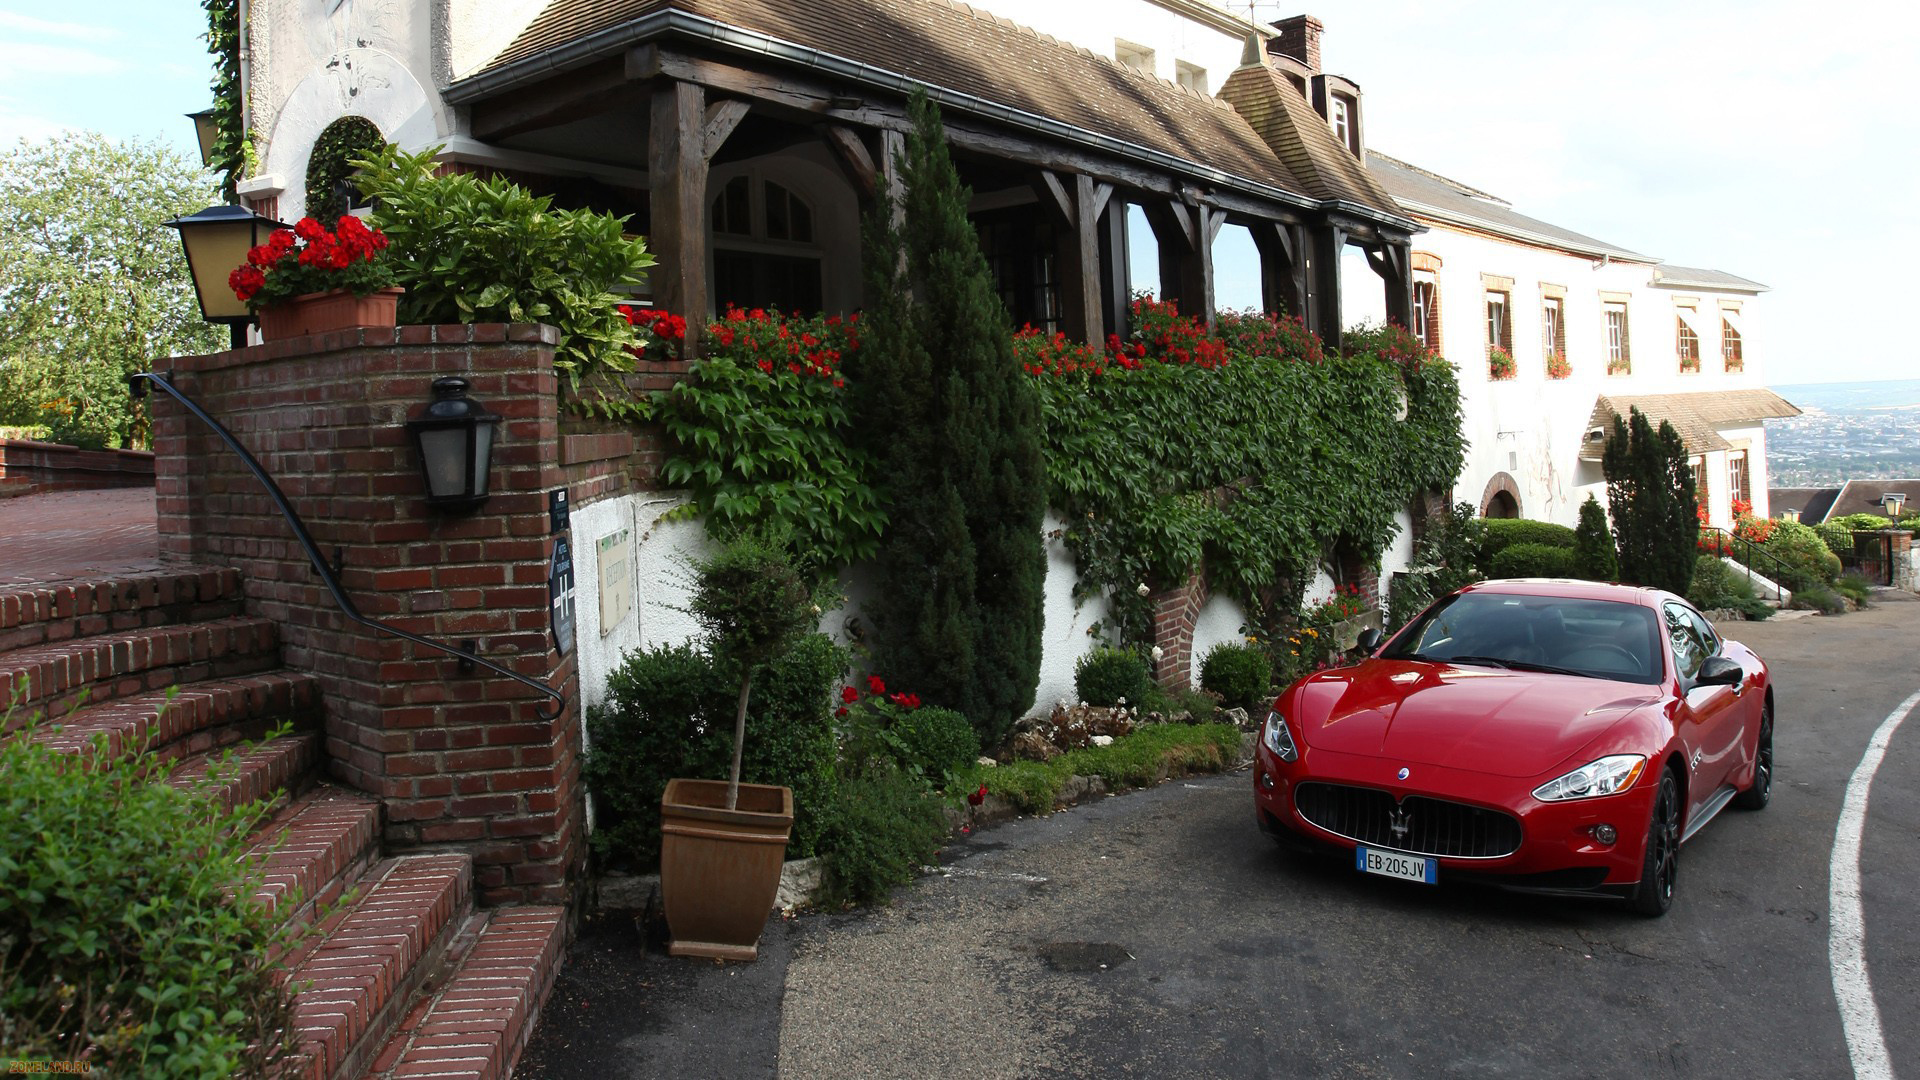 car, Maserati, Red Cars, Ivy, House, Stairs Wallpaper